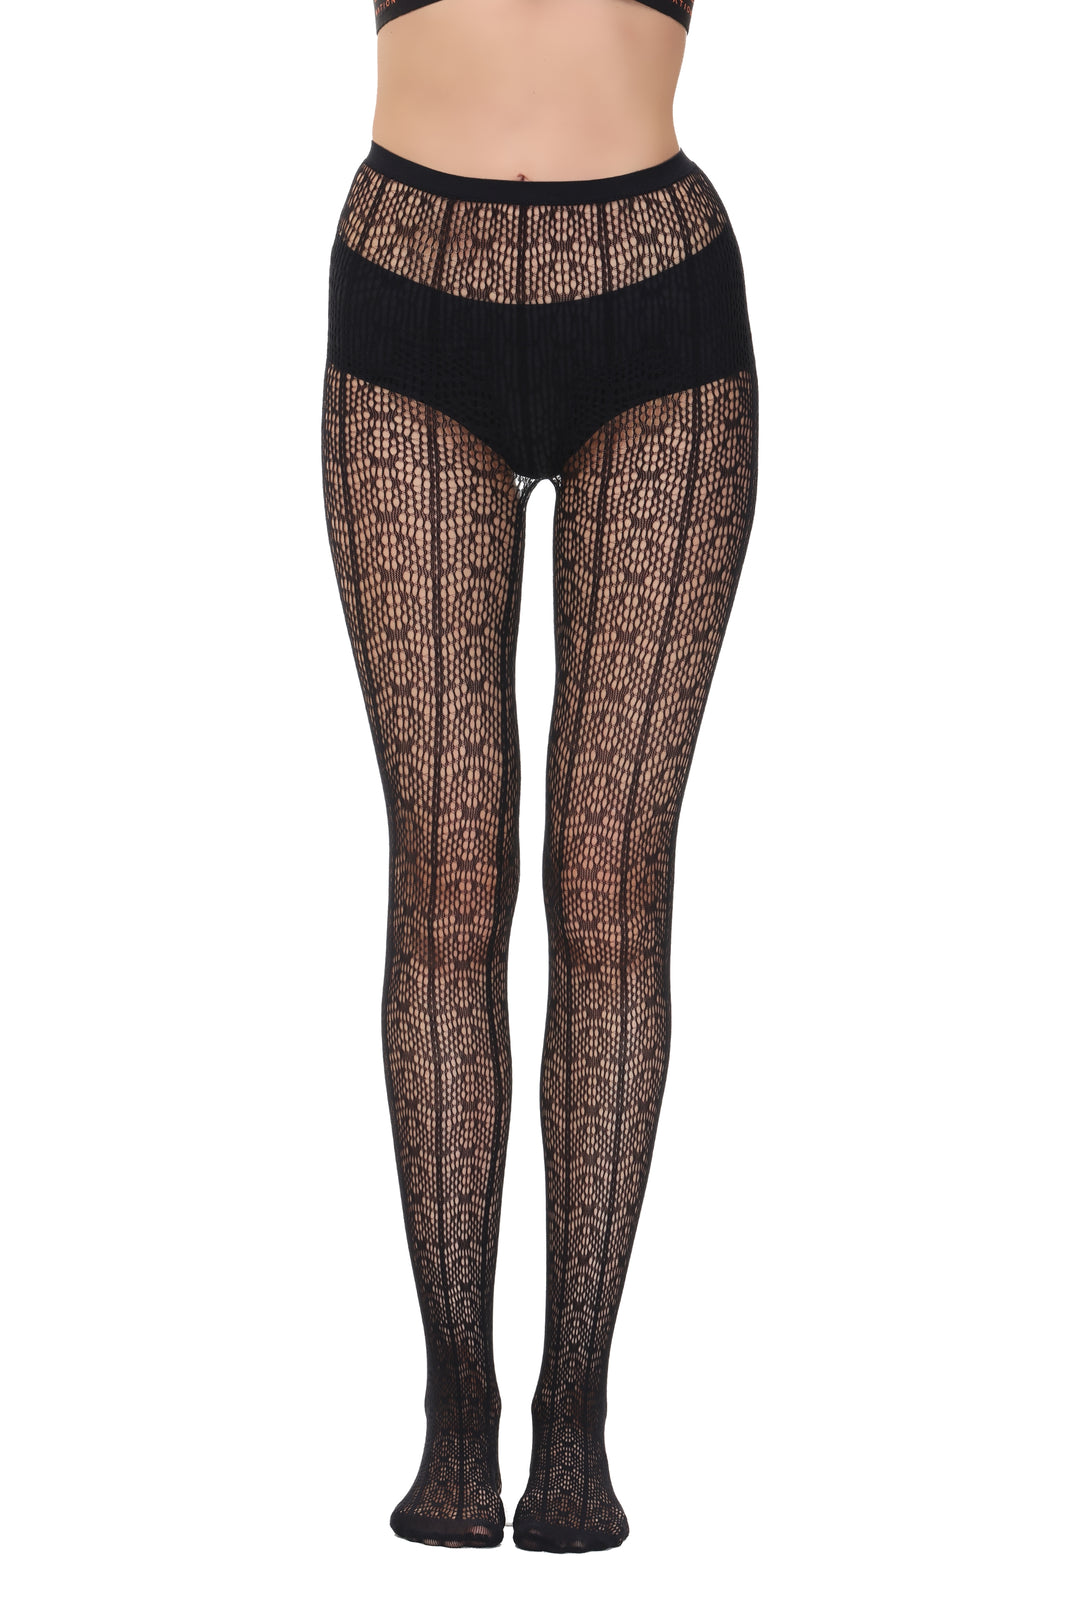 Fishnet Tights 110934 Front